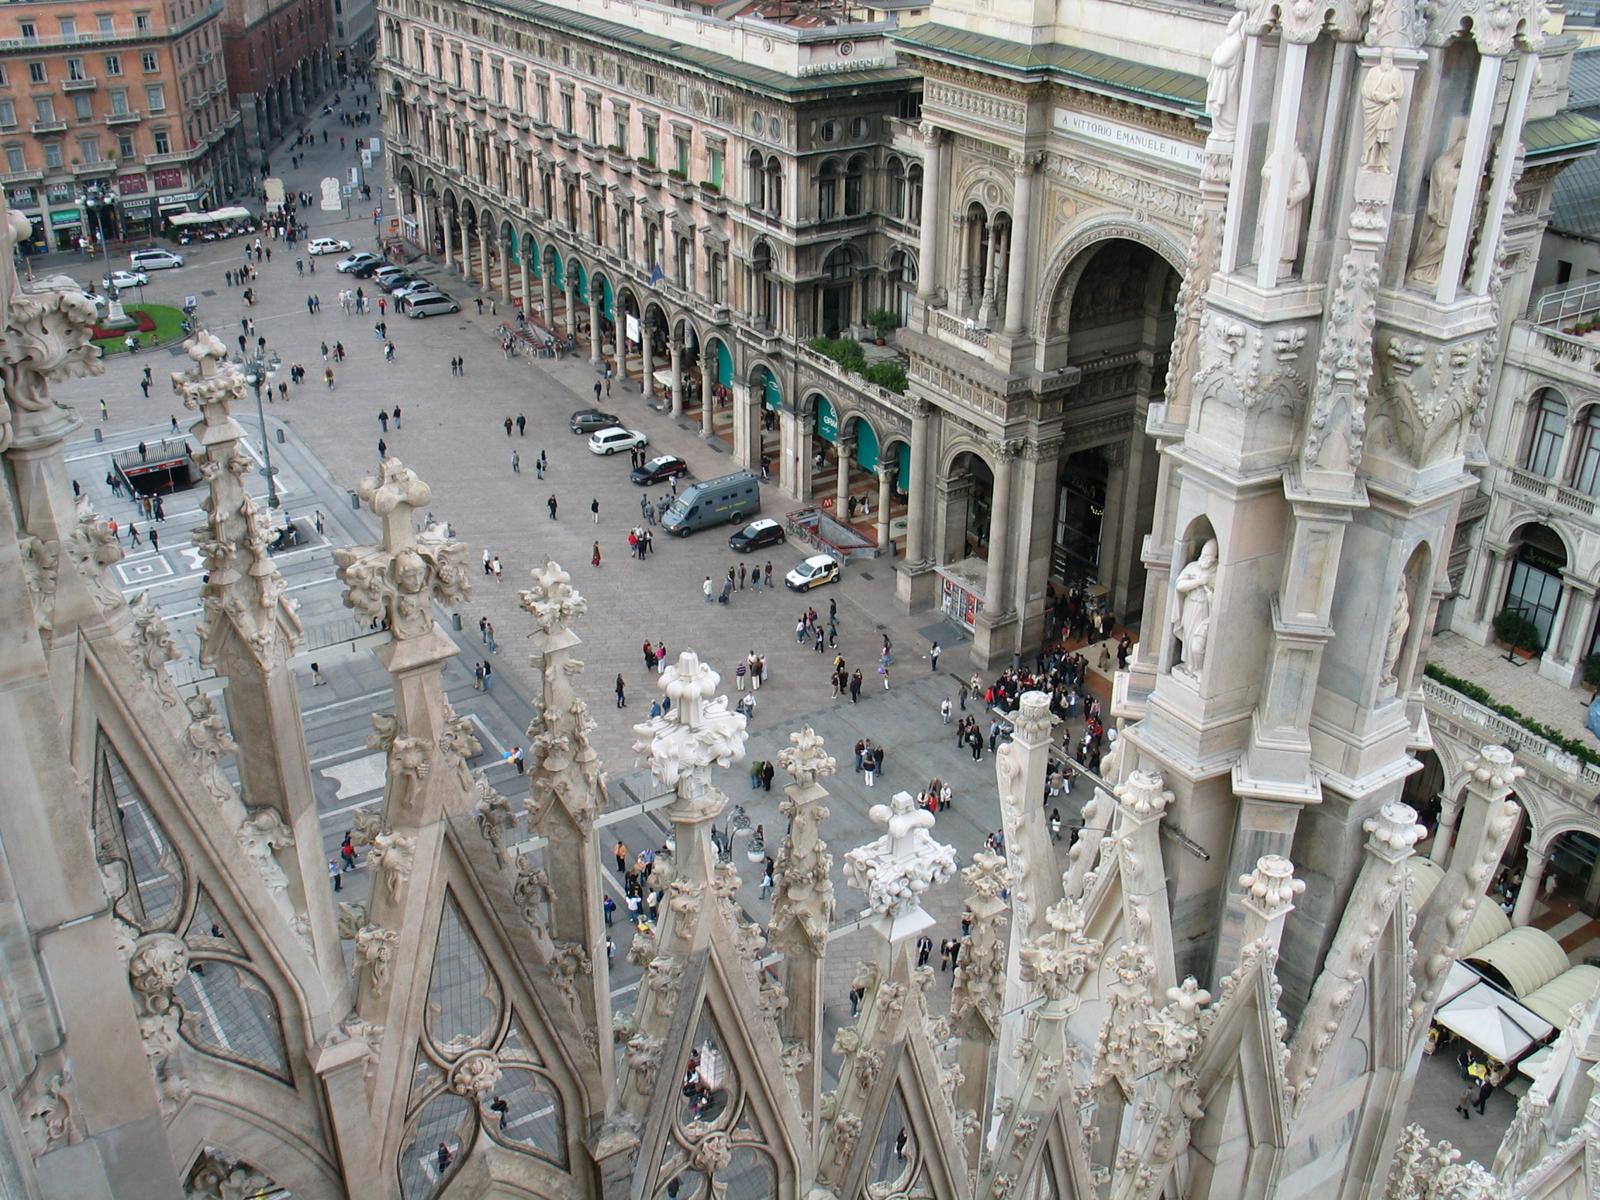 The view from the Duomo